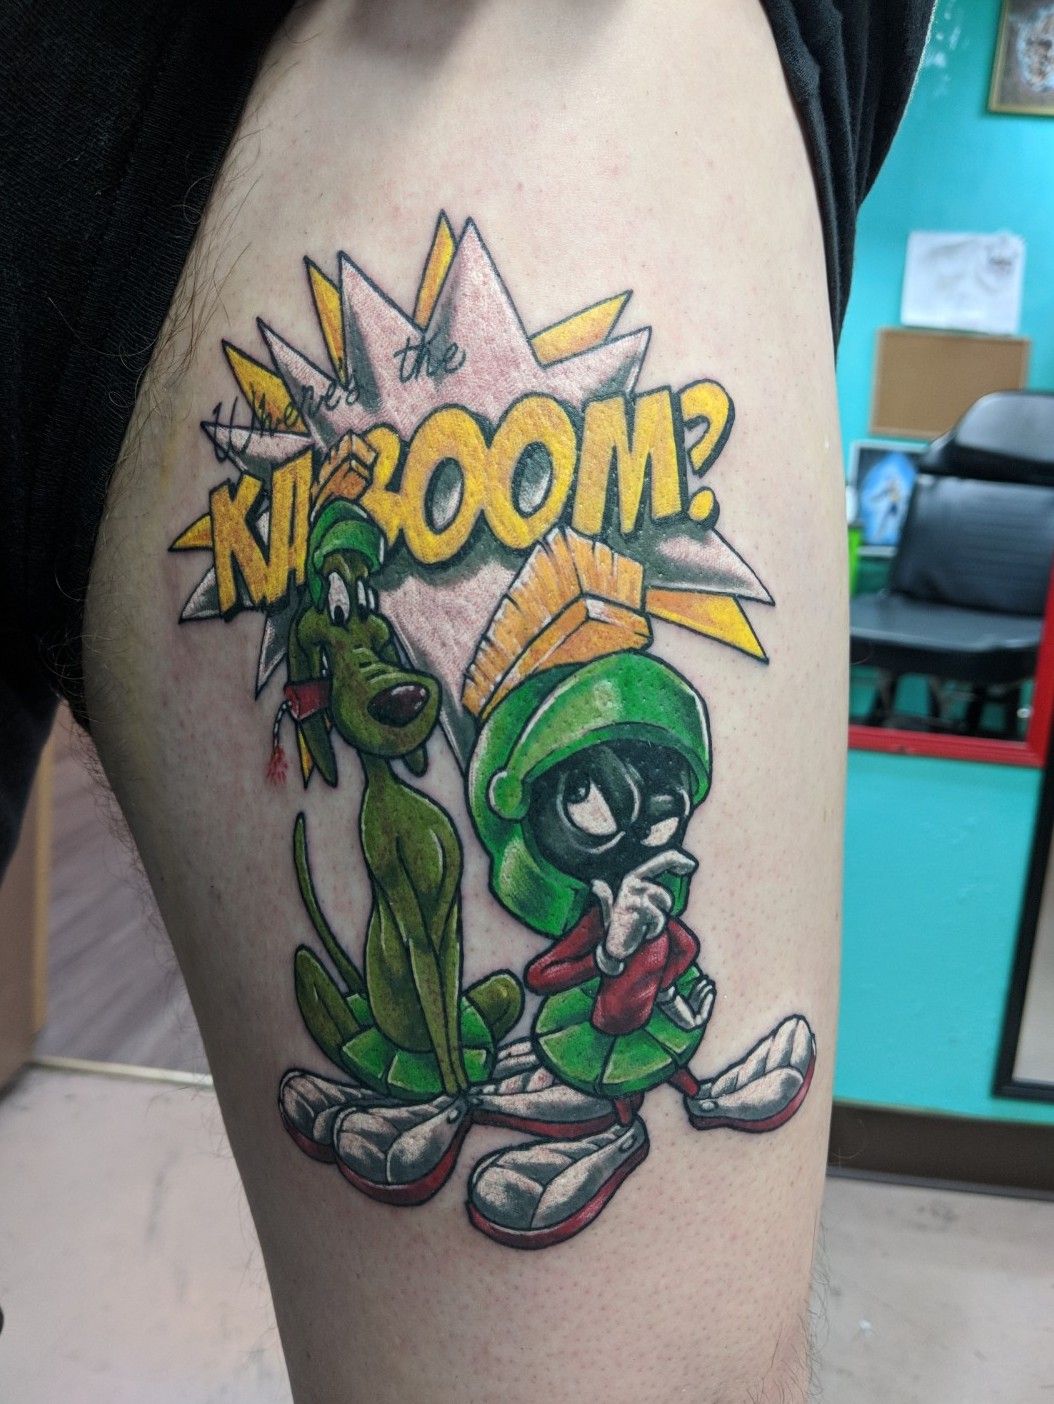 A personal favorite from my Etsy shop  httpswwwetsycomlisting518272479martiancartoondecalcardec   Marvin the martian Cartoon tattoos Skull art drawing